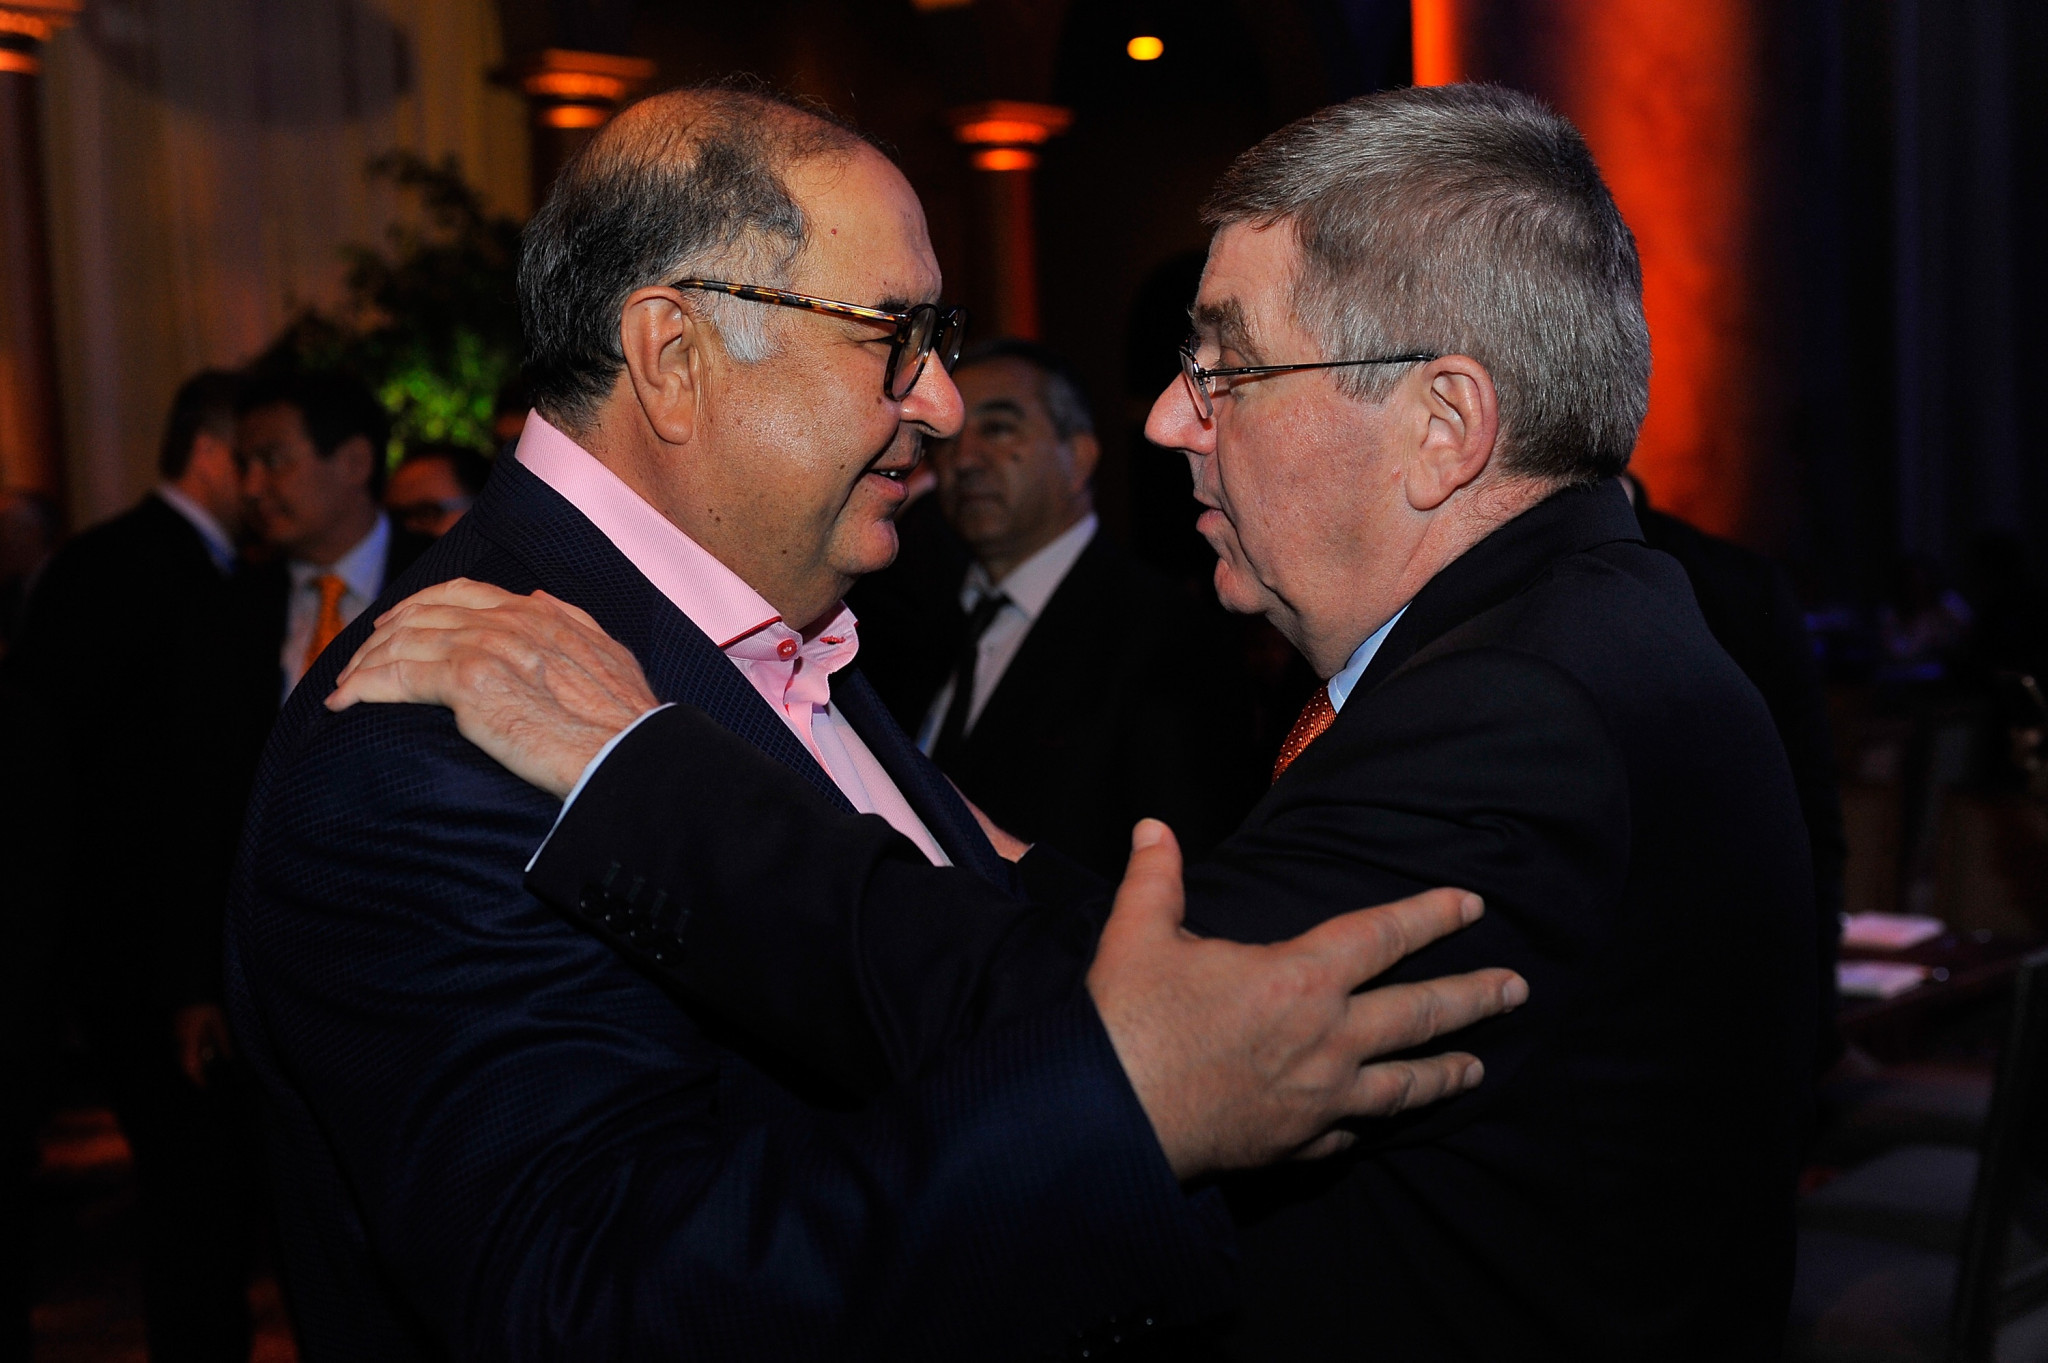 Alisher Usmanov, left, received congratulations from IOC President Thomas Bach, right, after being elected to a fourth term as FIE President last year ©Getty Images